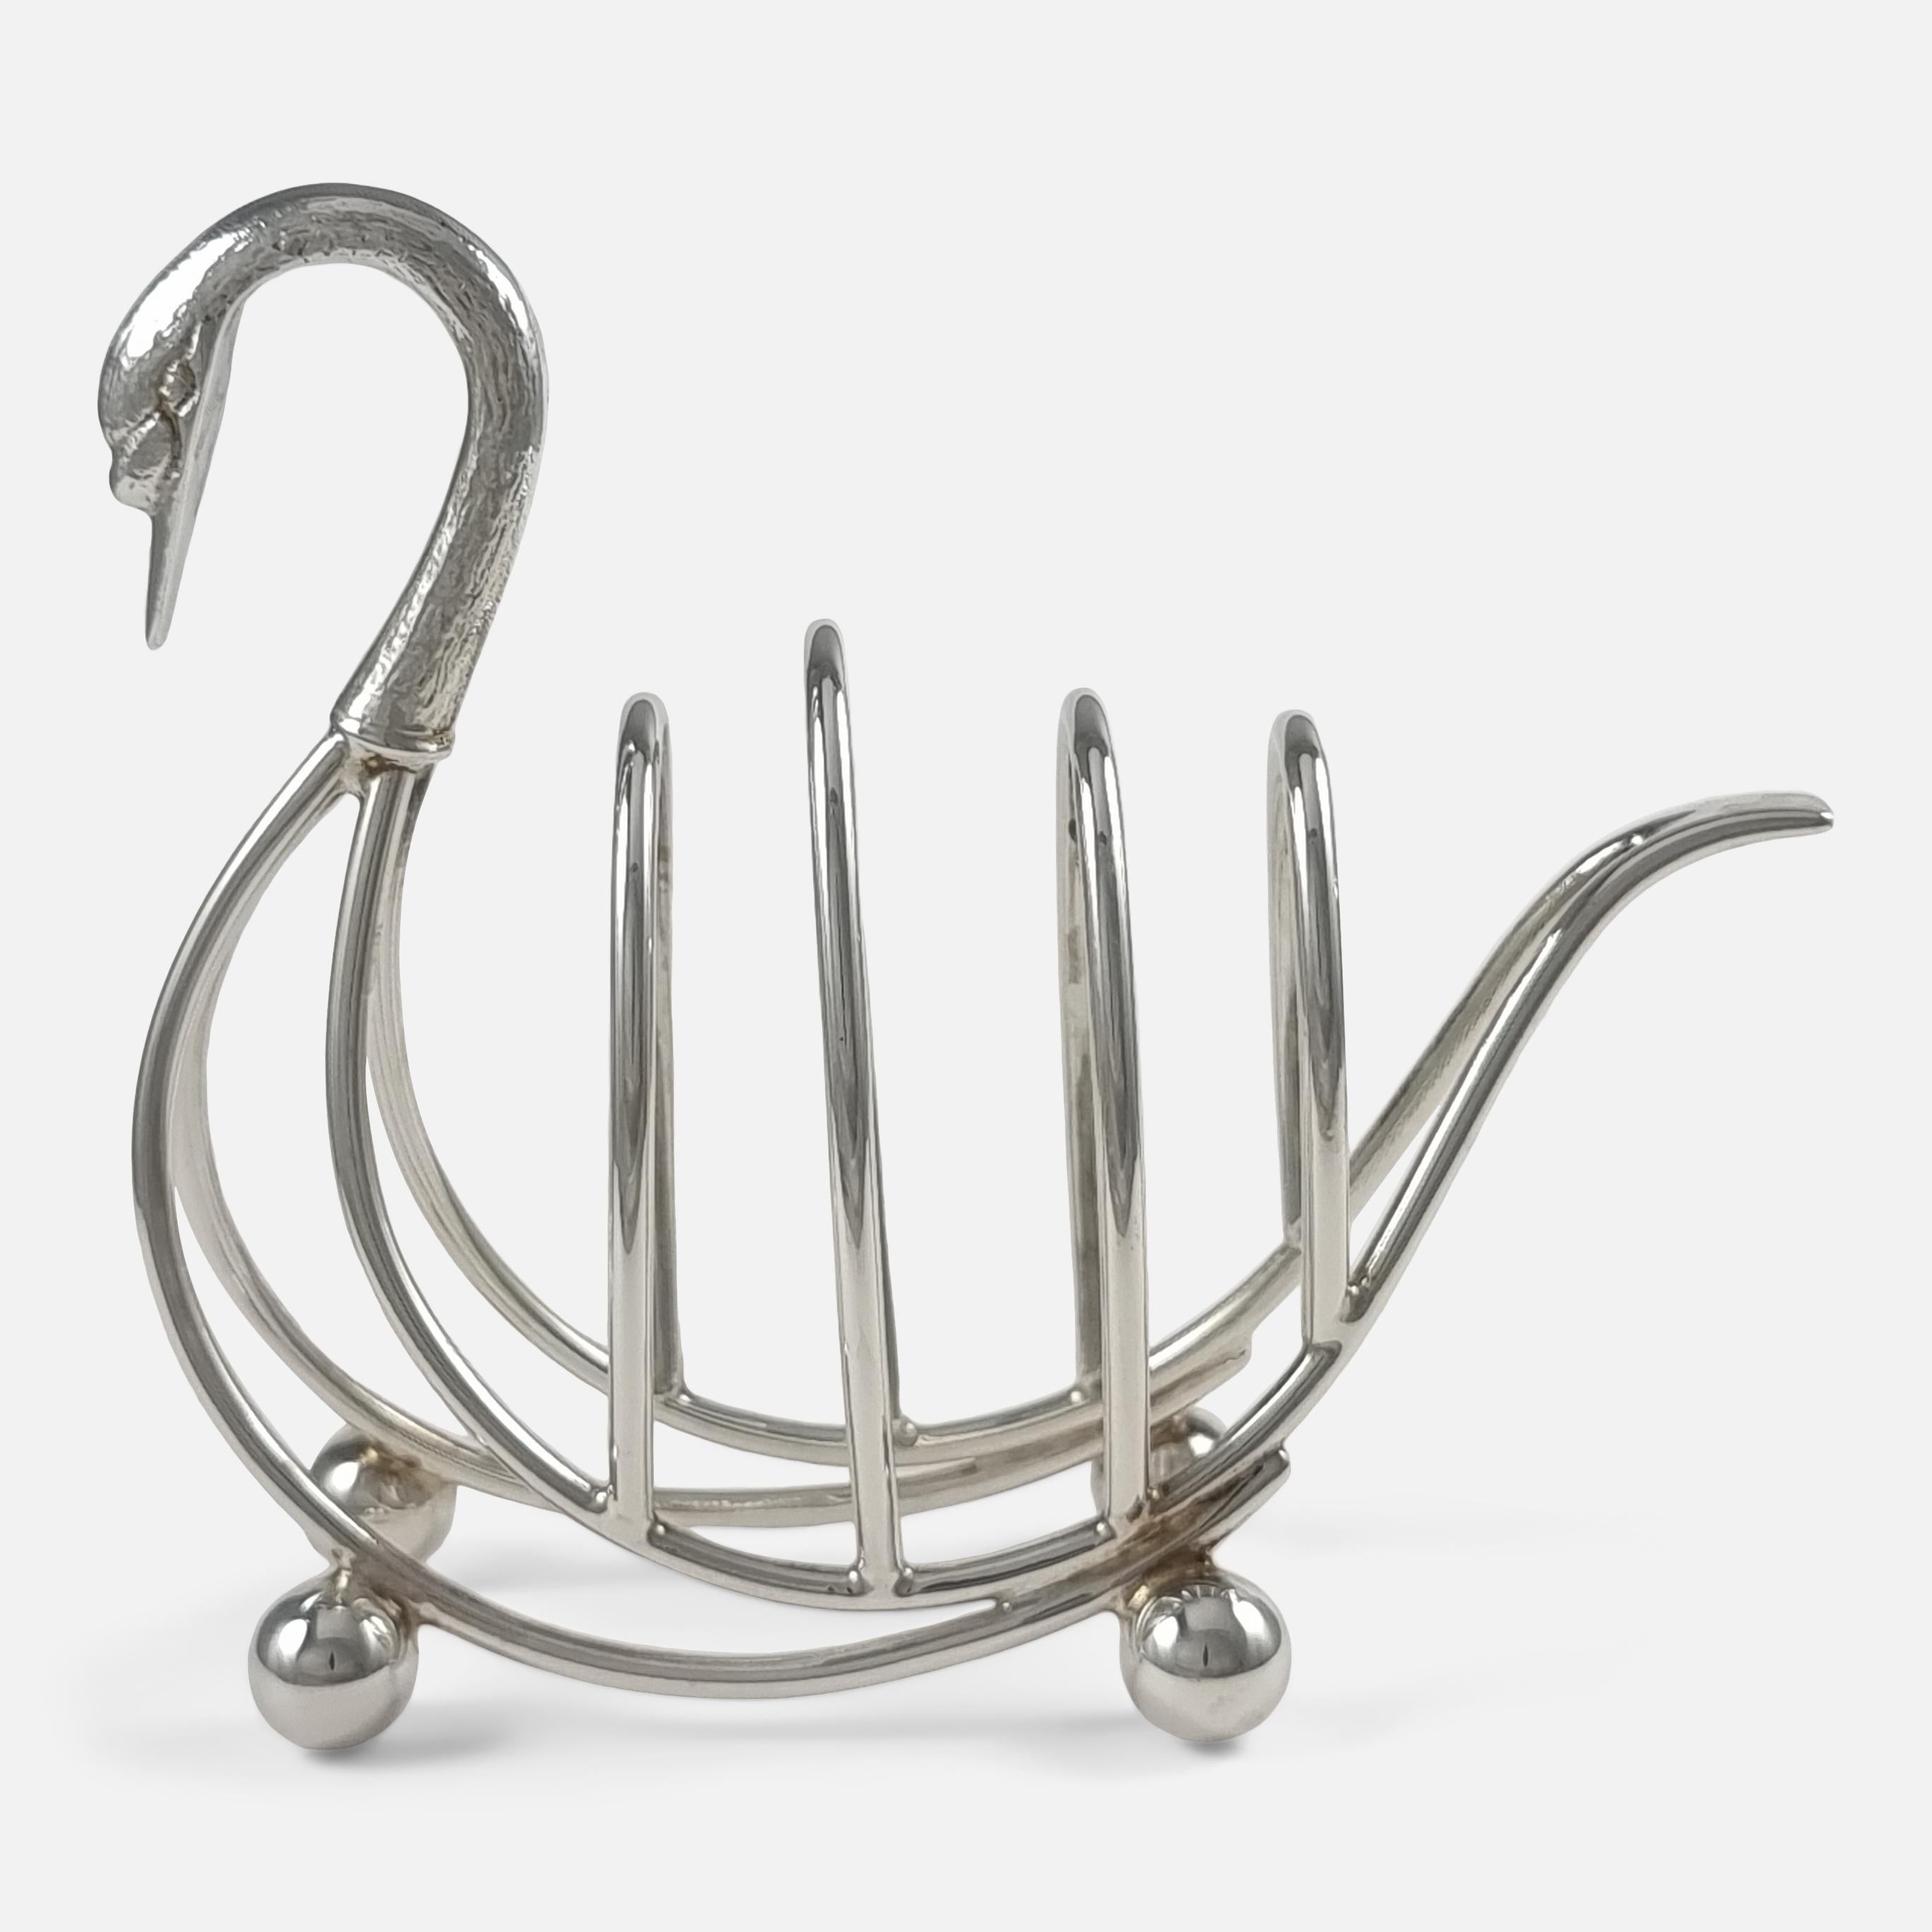 An Elizabeth II sterling silver swan toast rack, by Bishton's Ltd, Birmingham, 1971. The three-division toast rack is in the form of a swan, resting on four ball feet.

Assay: - .925 (Sterling Silver).

Period: - Late 20th century.

Date: -